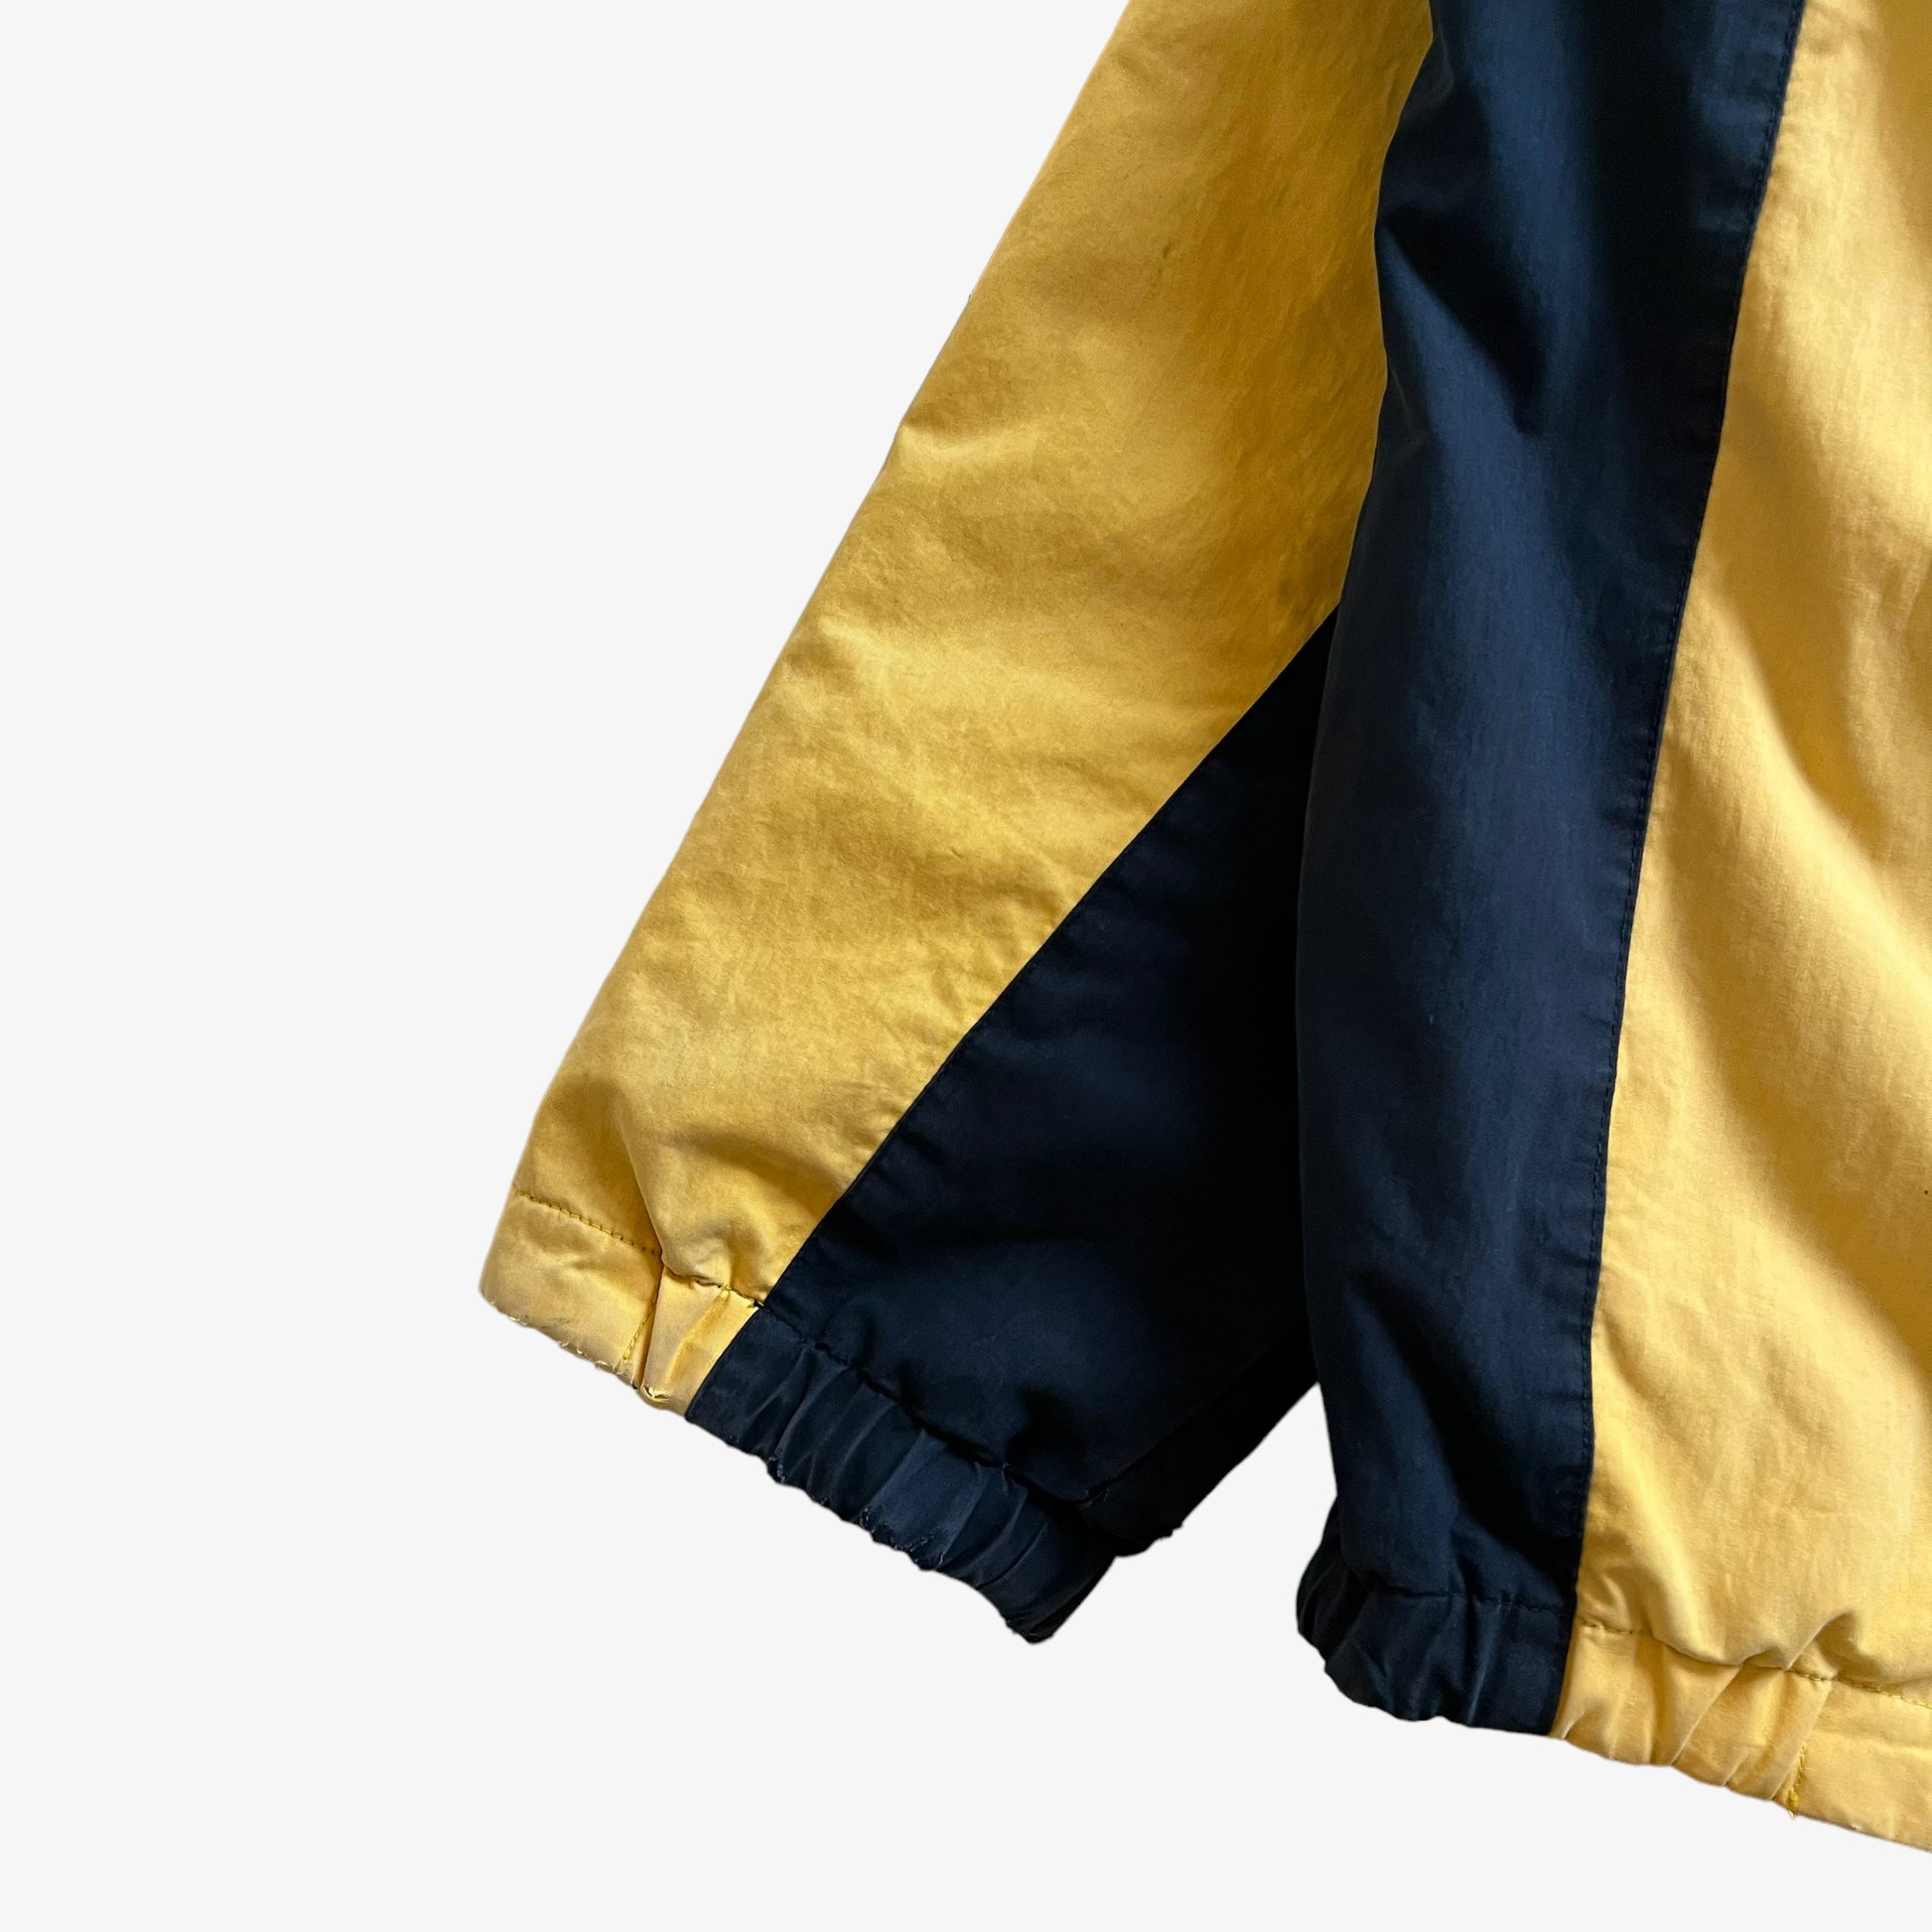 Vintage 90s Mens Nautica Reversible Yellow Sailing And Navy Striped Fleece Jacket Cuff - Casspios Dream